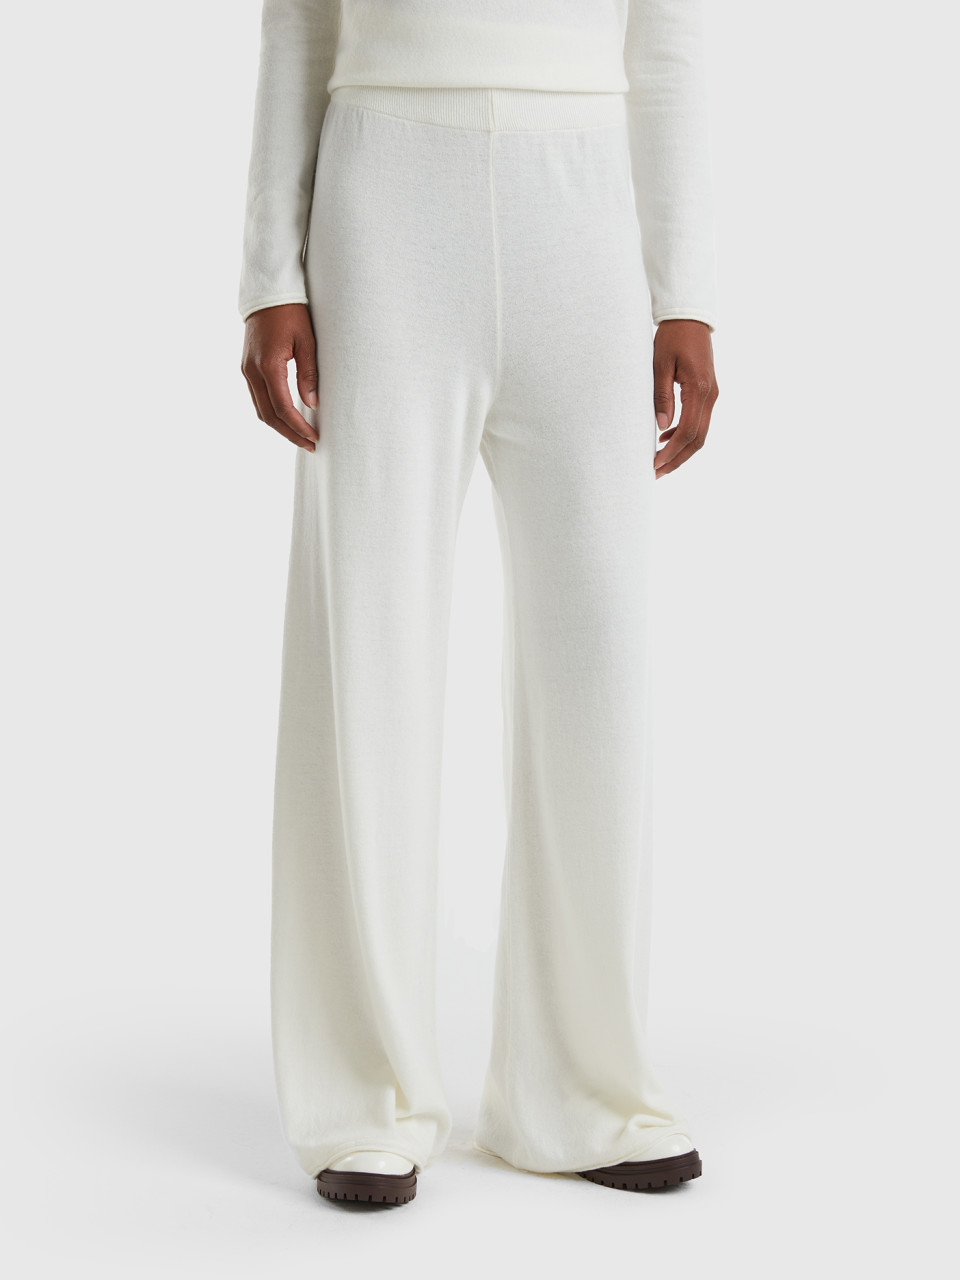 Benetton, Cream White Wide Trousers In Cashmere And Wool Blend, Creamy White, Women